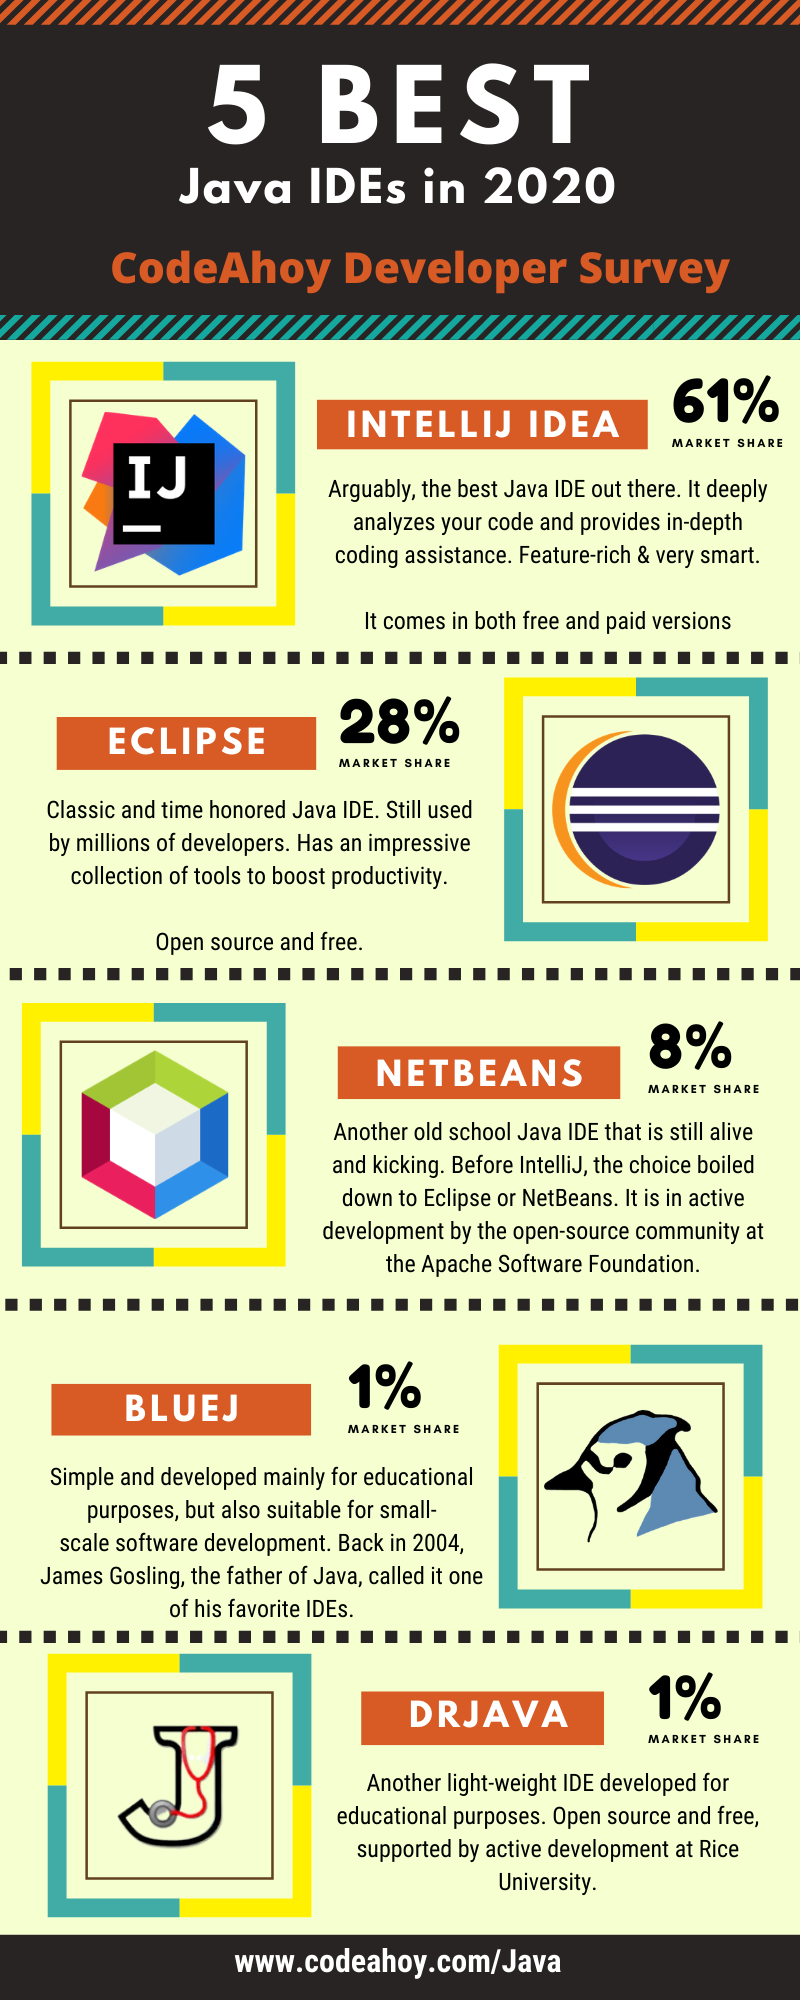 Infographic Showing Top 5 Java IDEs including IntelliJ IDEA, Eclipse, NetBeans, BlueJ and DrJava